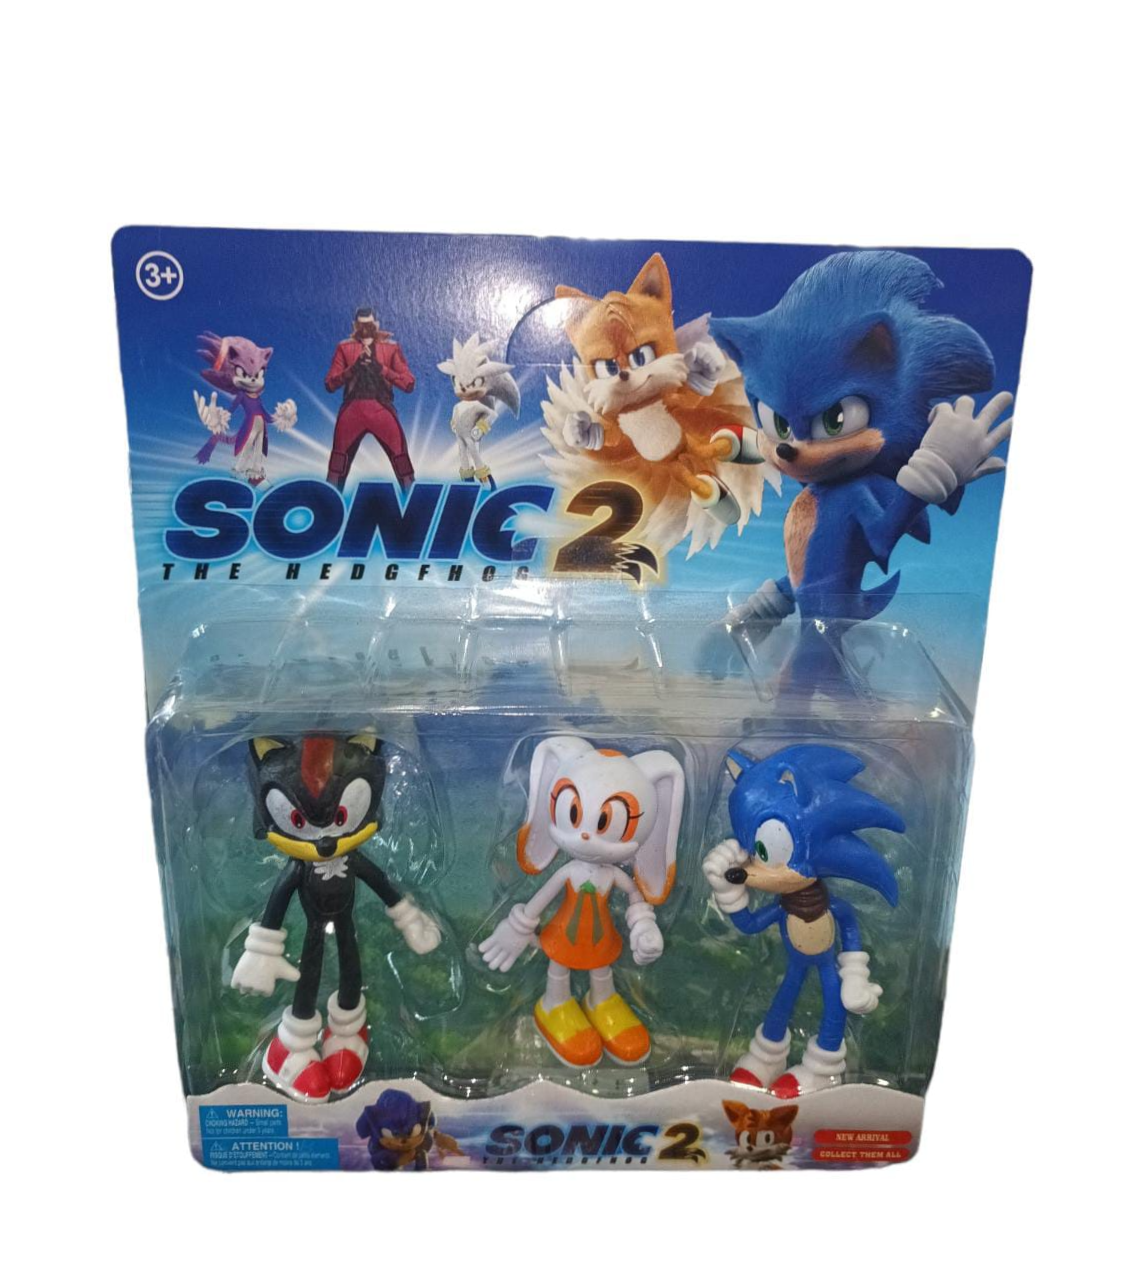 Sonic The Hedgehog 2 Toy set 3 Pieces